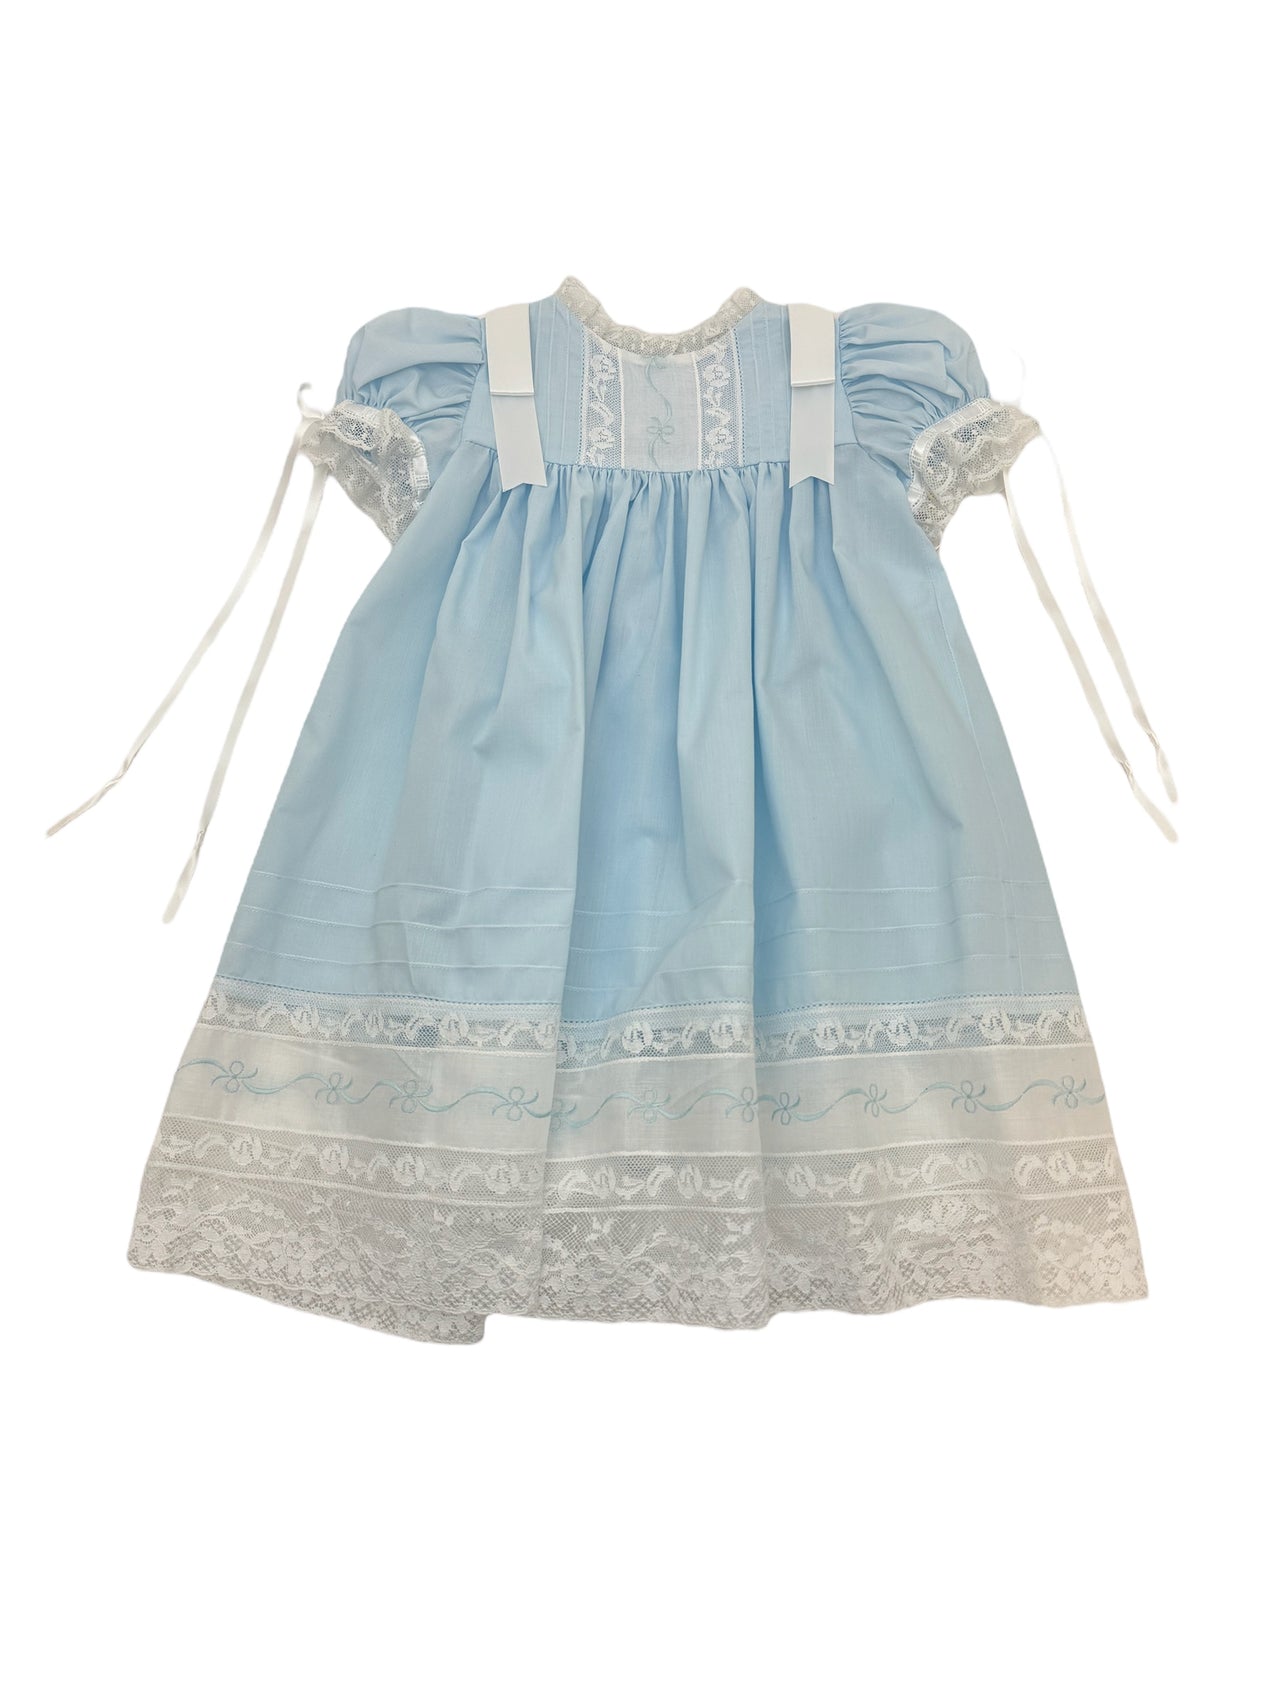 Treasured Memories Blue Dress W/White Lace Squared Bodice and Blue Bow Embroidery S2838